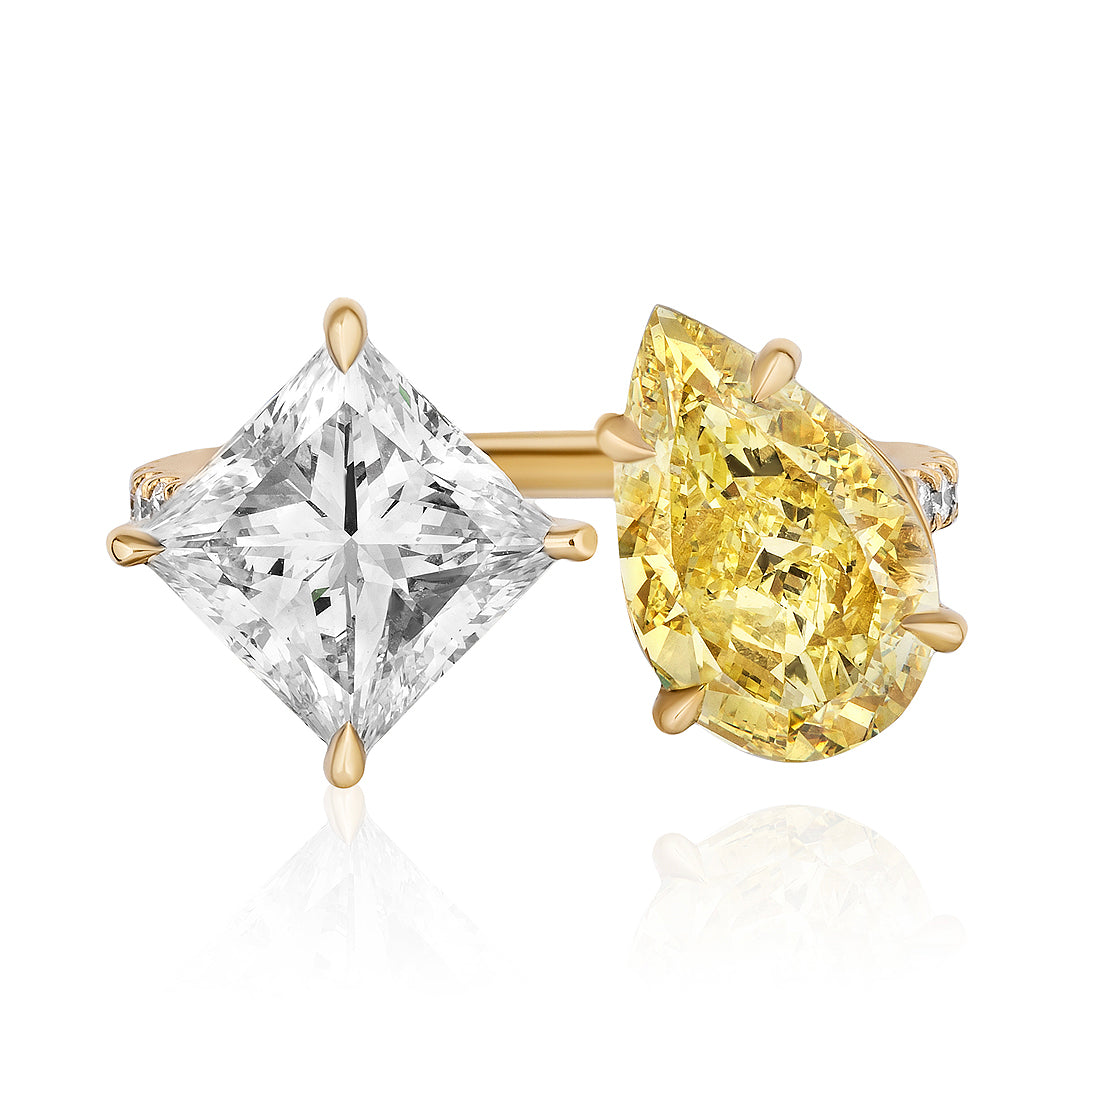 Toi et Moi Pavé Ring with Fancy Yellow Pear and White Princess Cut Diamonds